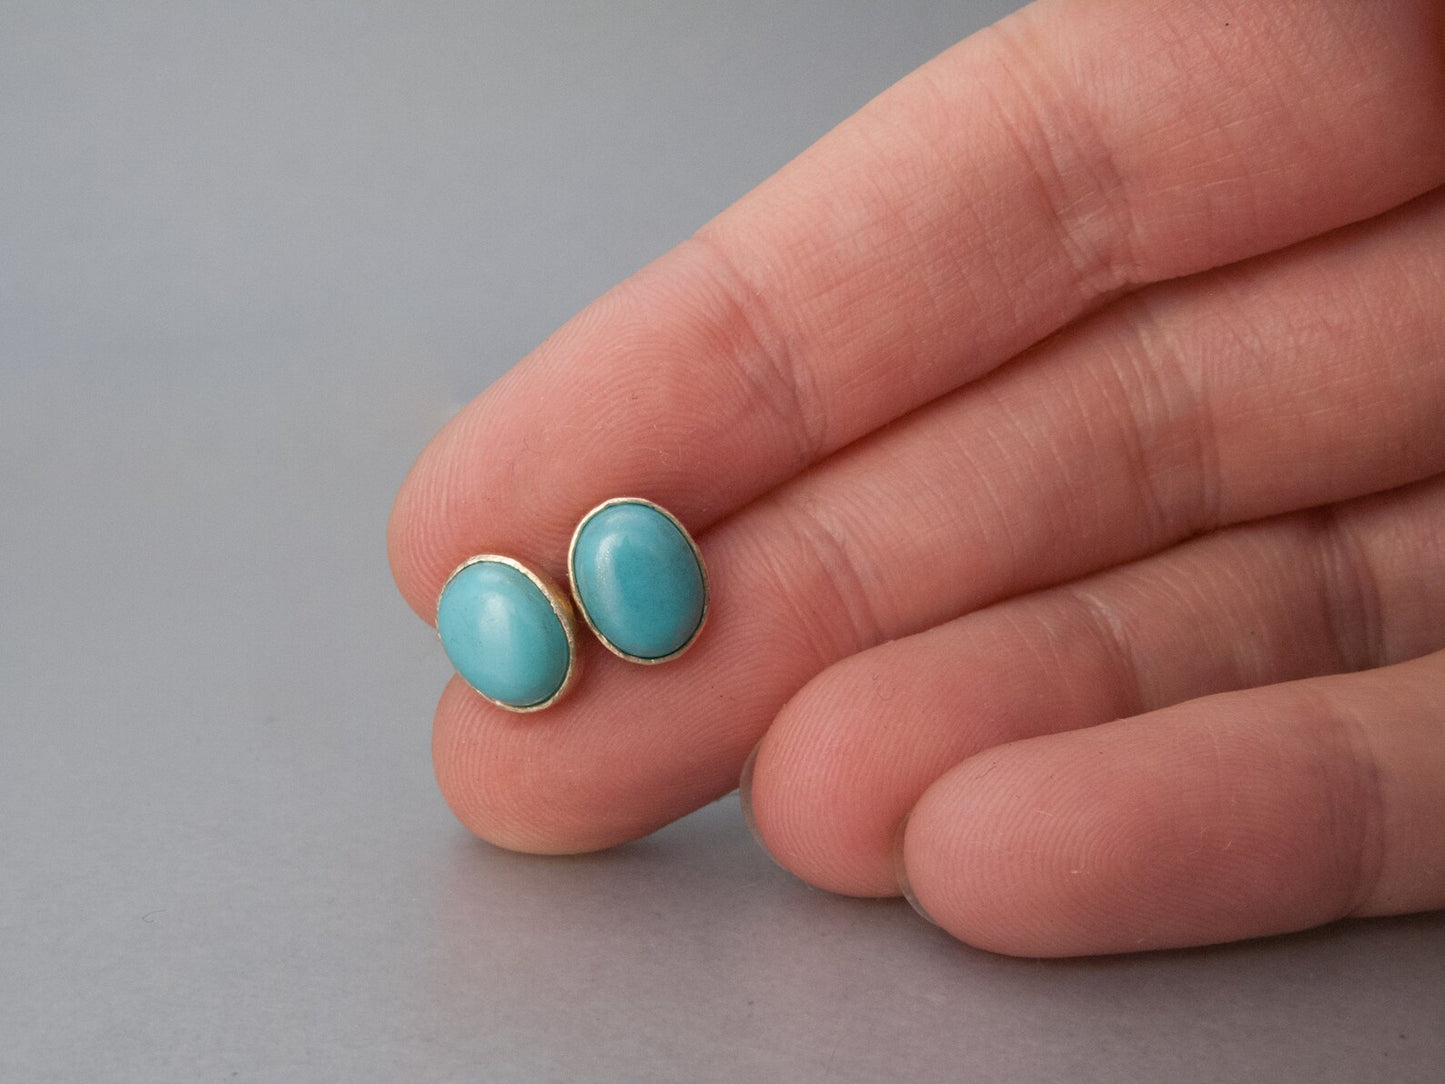 Oval Turquoise 14k Yellow Gold Bezel Studs, 8x6mm oval cabochon earrings